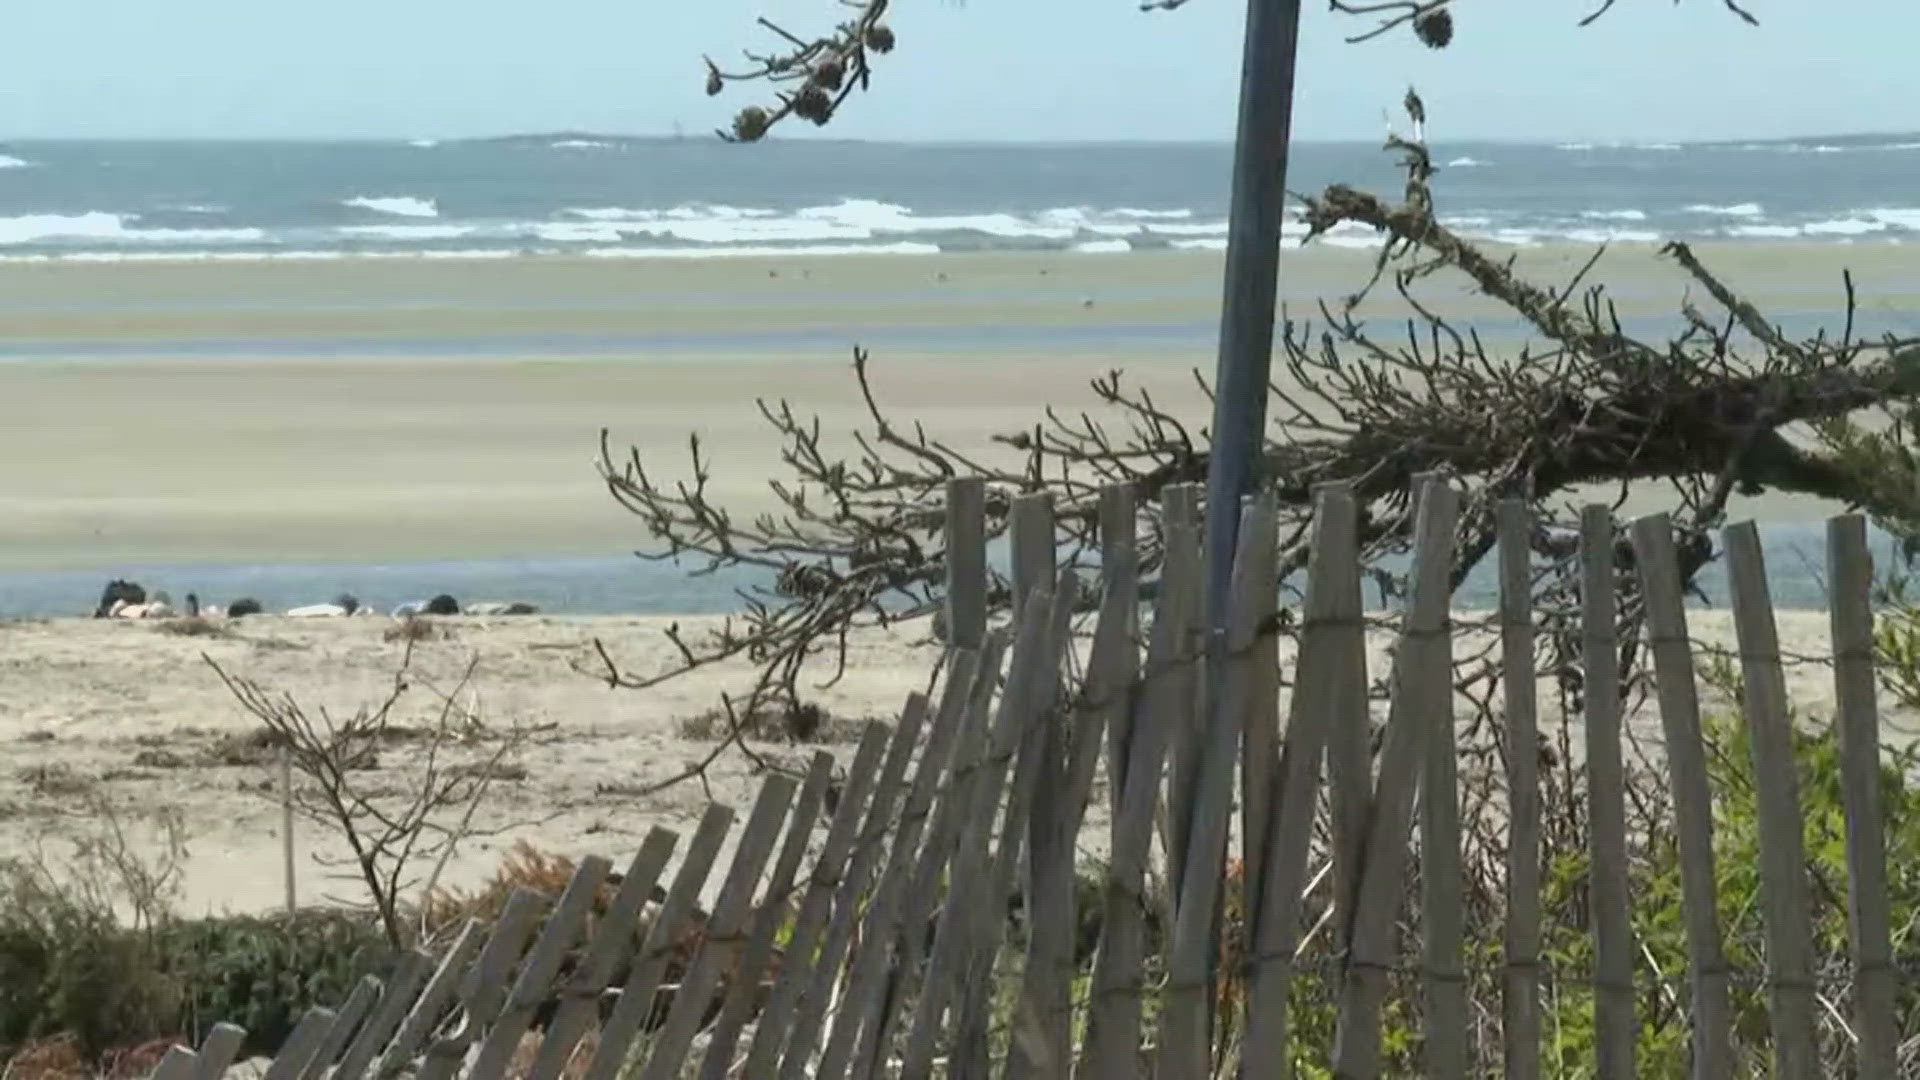 Lifeguard leaders at Popham Beach State Park say folks are still having trouble hiring enough to cover summer shifts, despite outreach efforts.